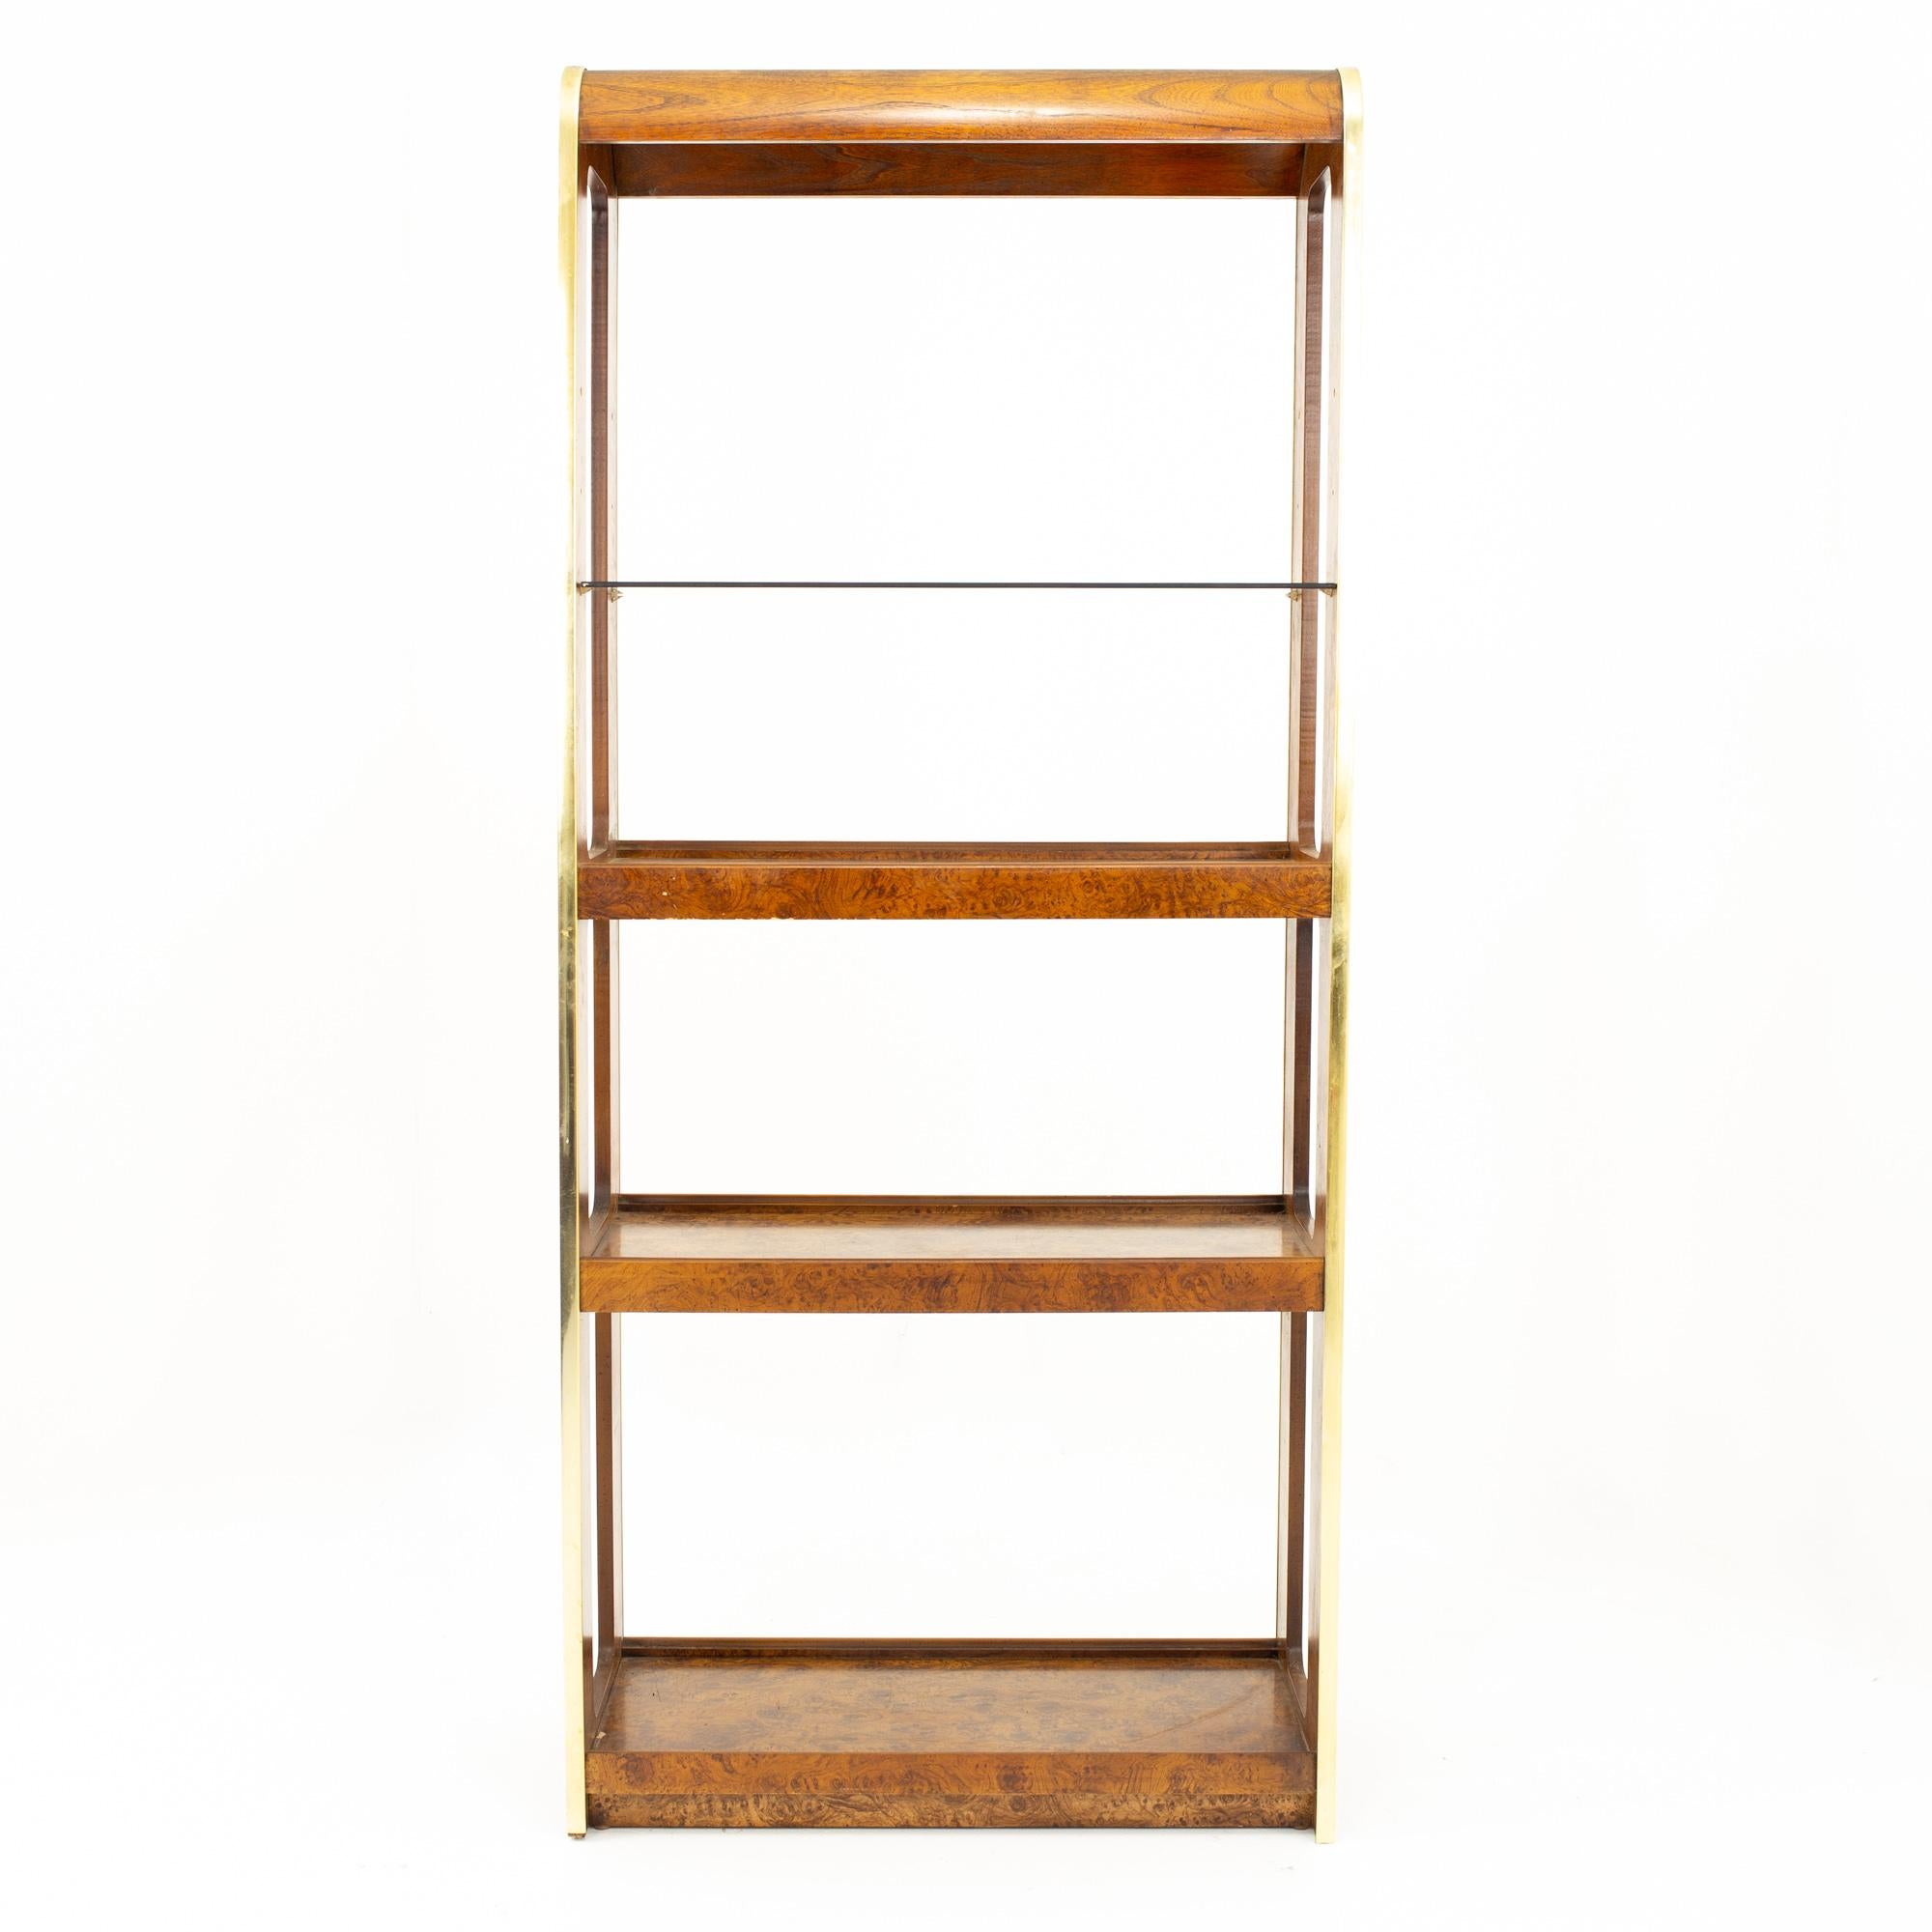 Mid Century Brass and Burlwood Etagere Bookshelves

Bookshelf measures: 32 wide x 16.5 deep x 72.5 high

This set is available in what we call Restored Vintage Condition. Upon purchase it is thoroughly cleaned and minor repairs are made - all of